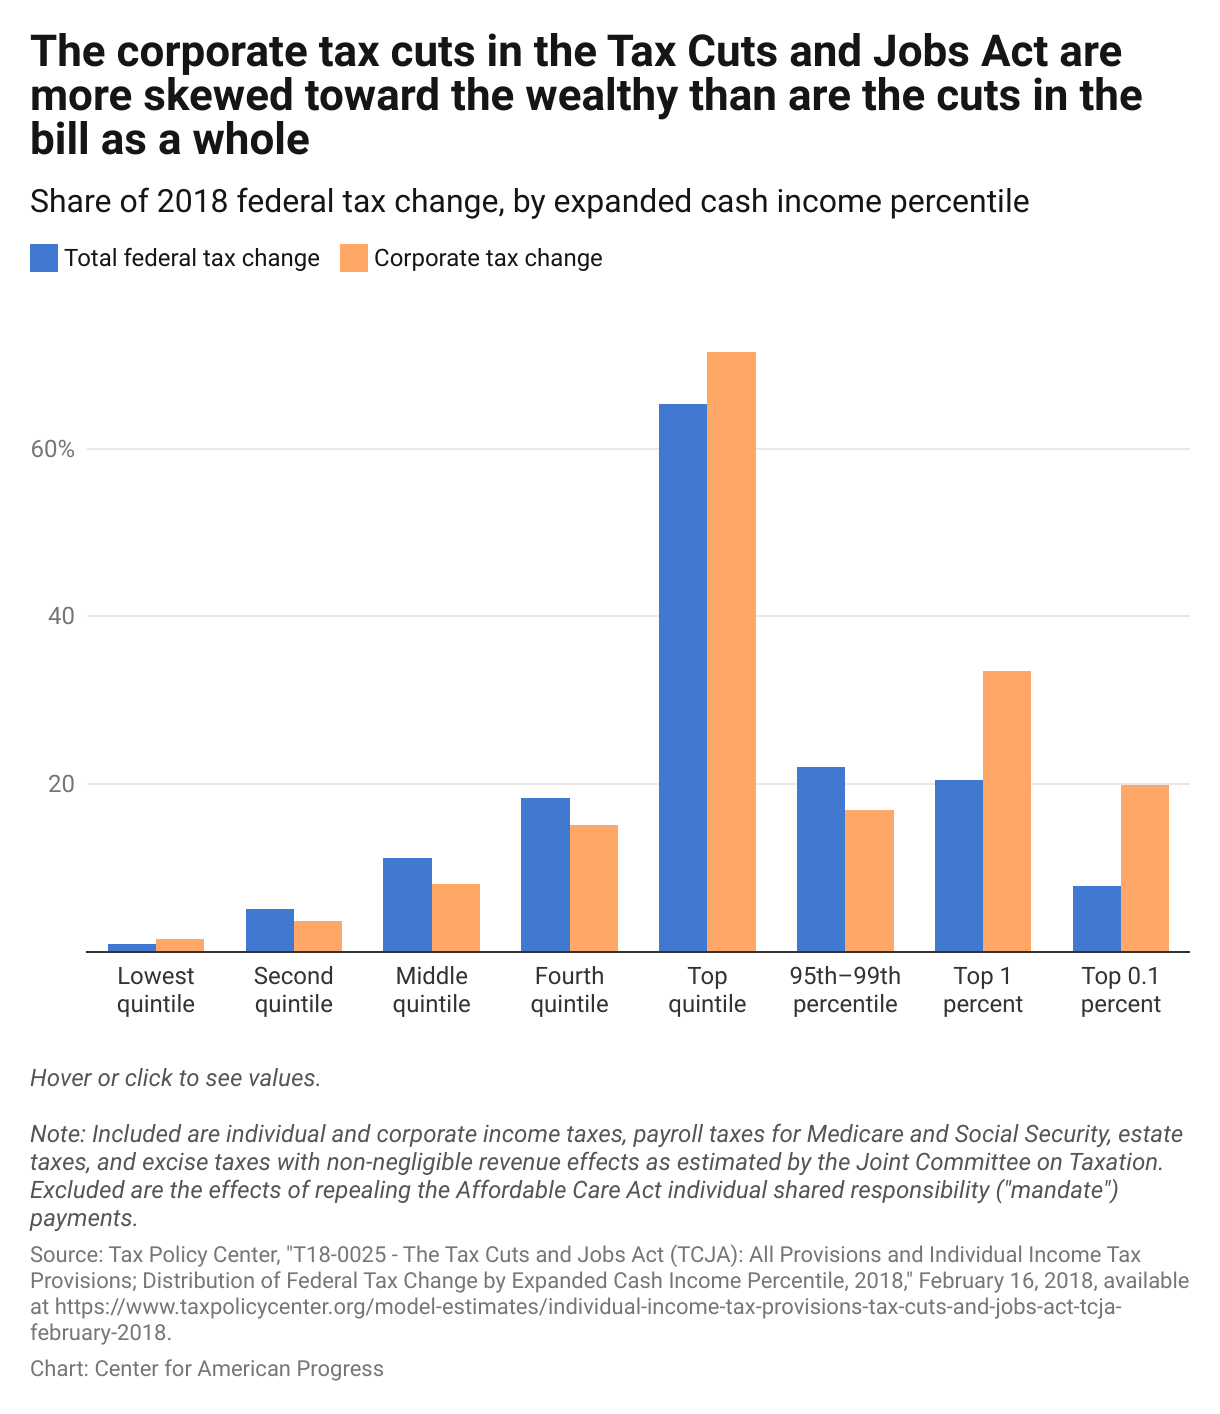 A bar chart showing that the benefits of the 2017 tax law's corporate tax changes are significantly skewed toward the wealthy.